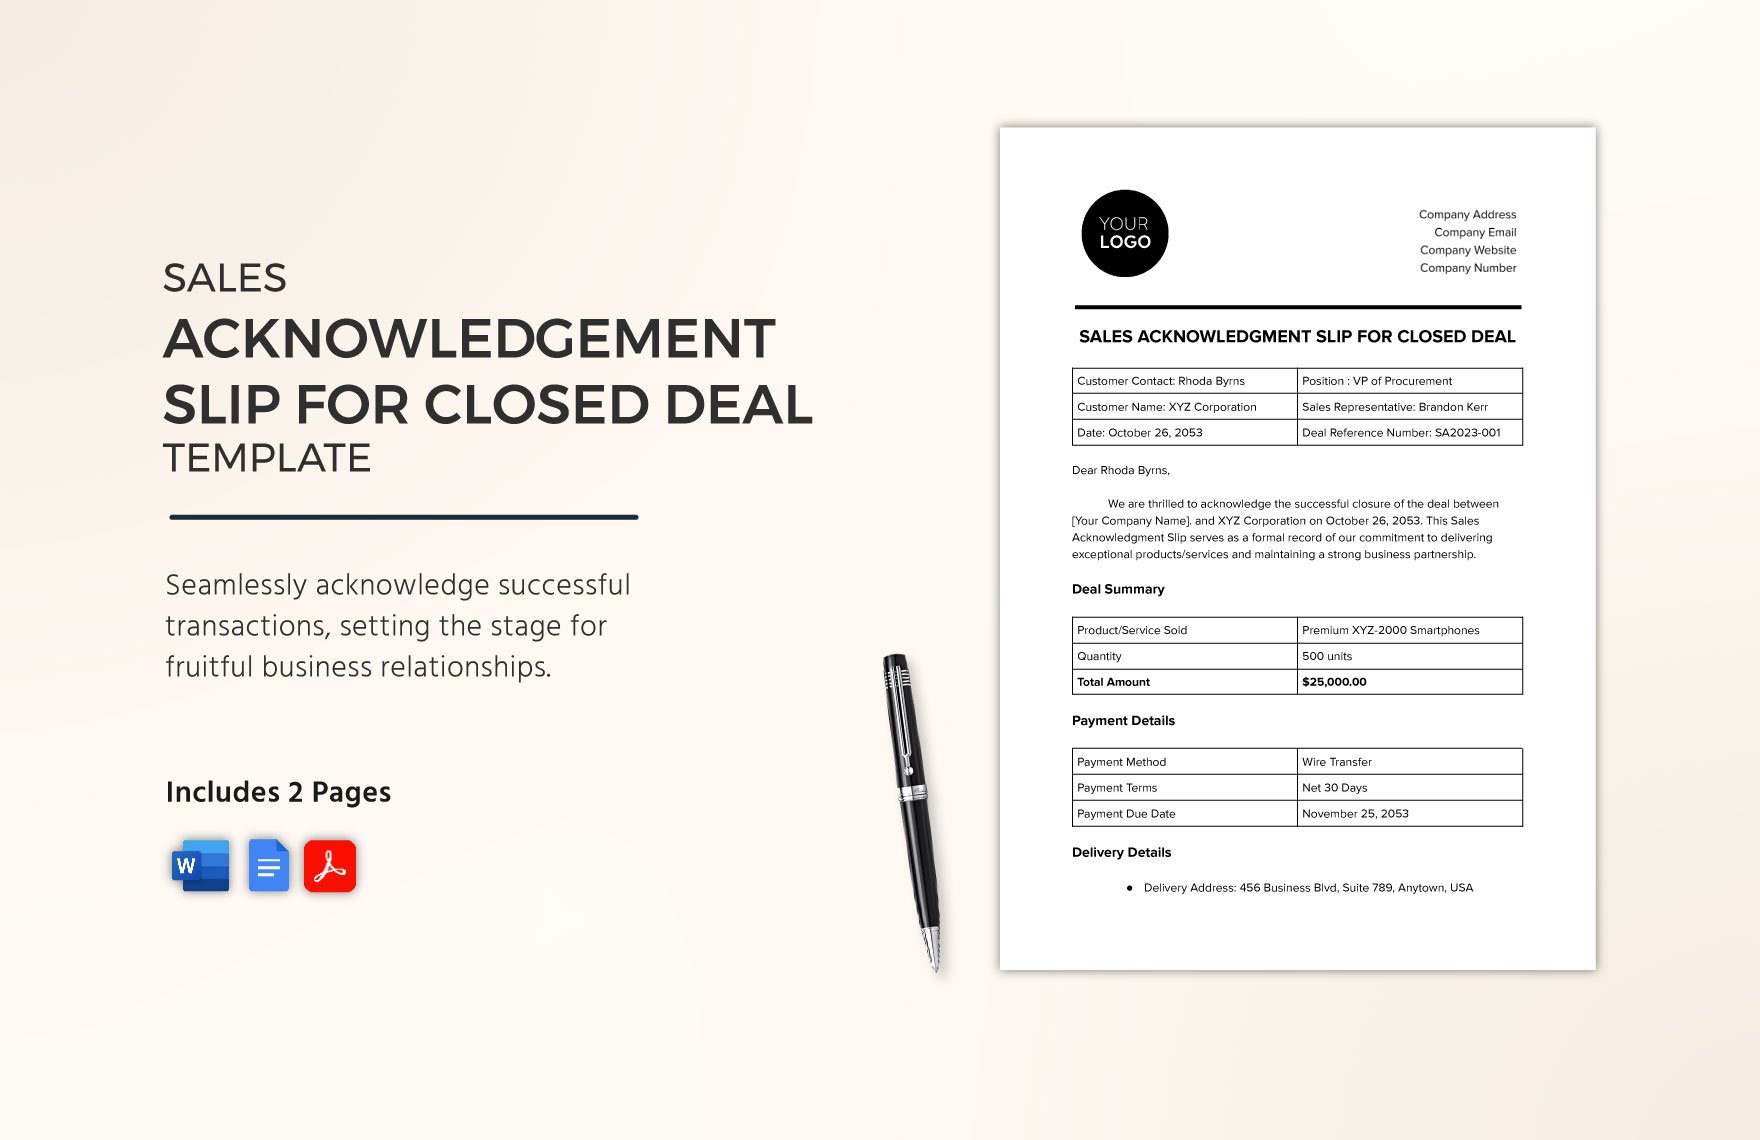 Sales Acknowledgment Slip for Closed Deal Template